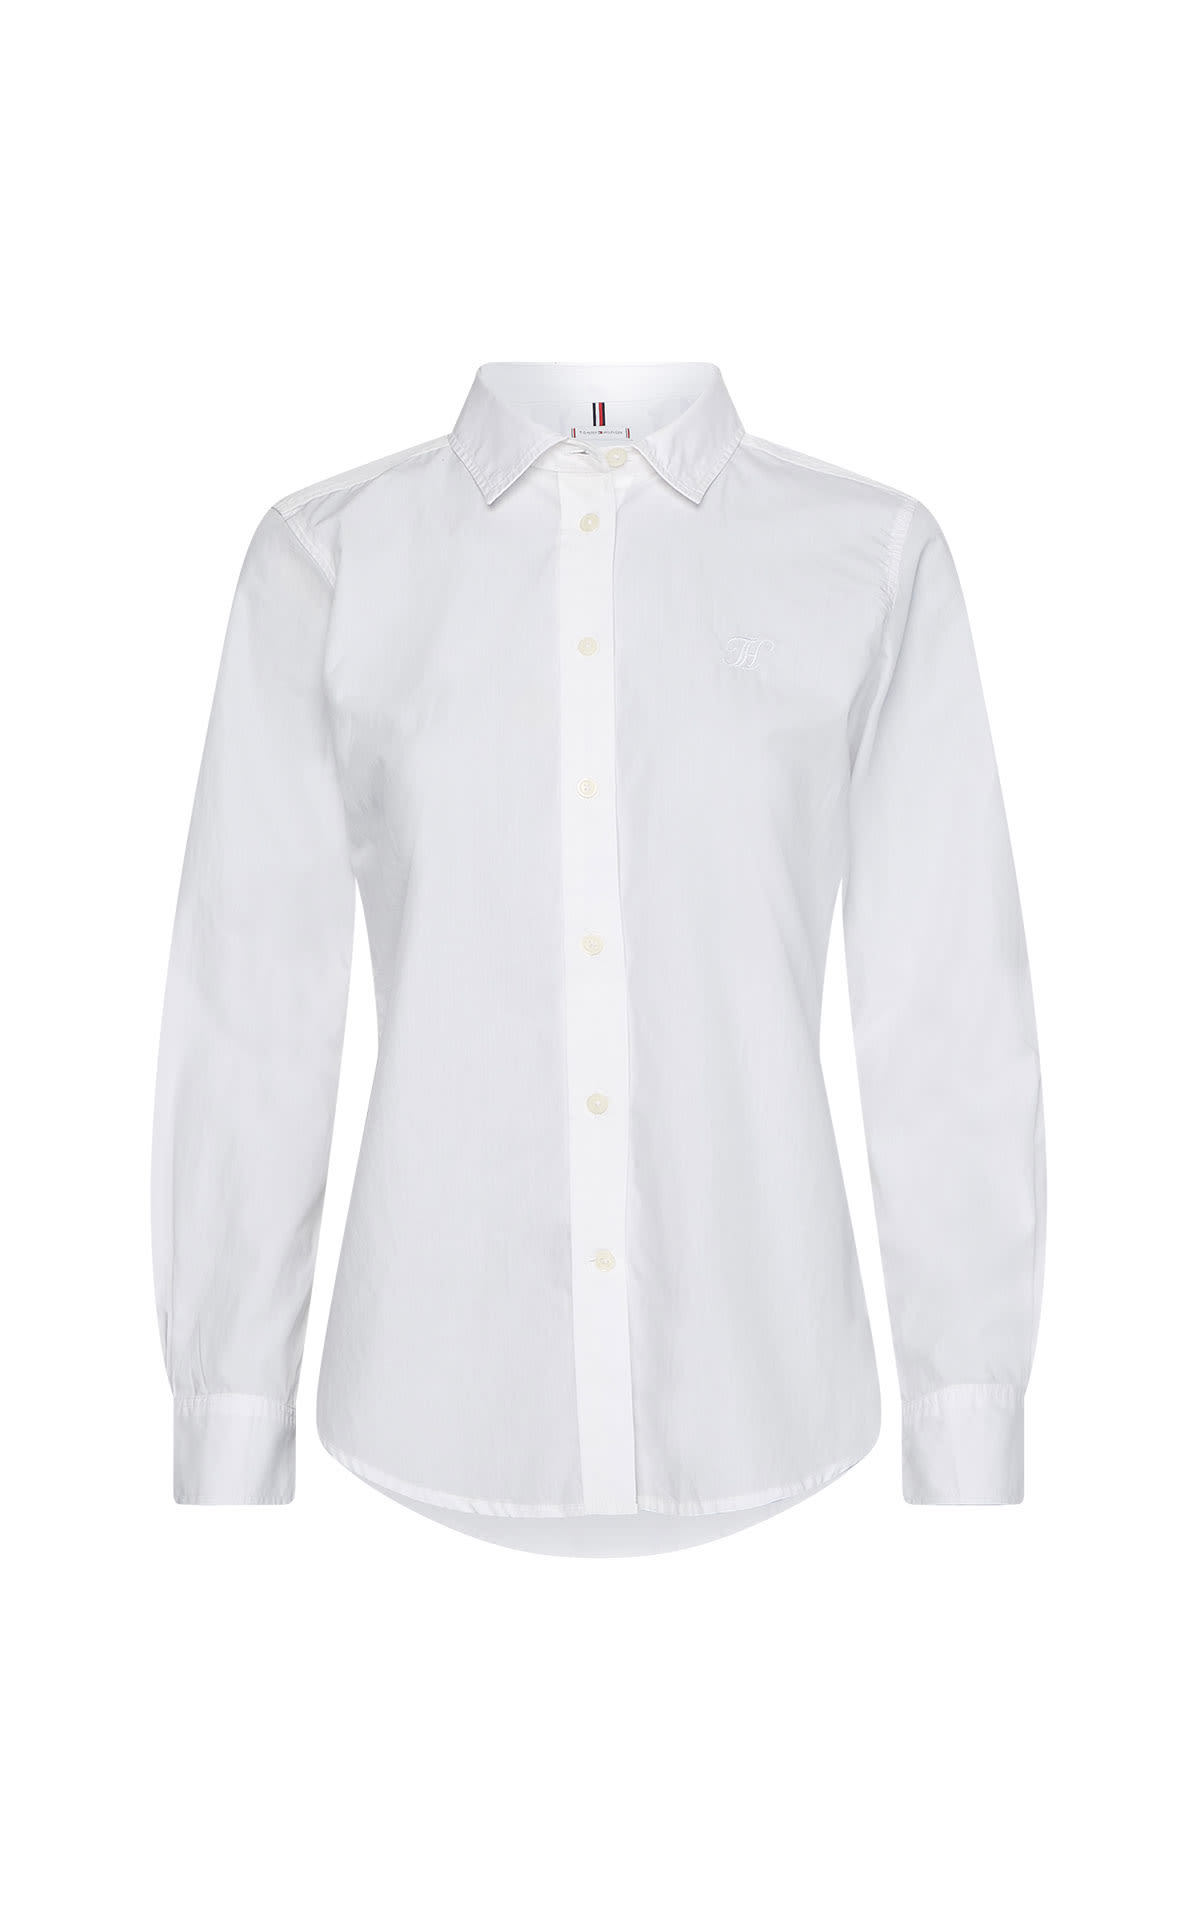 Women's fitted white shirt Tommy Hilfiger